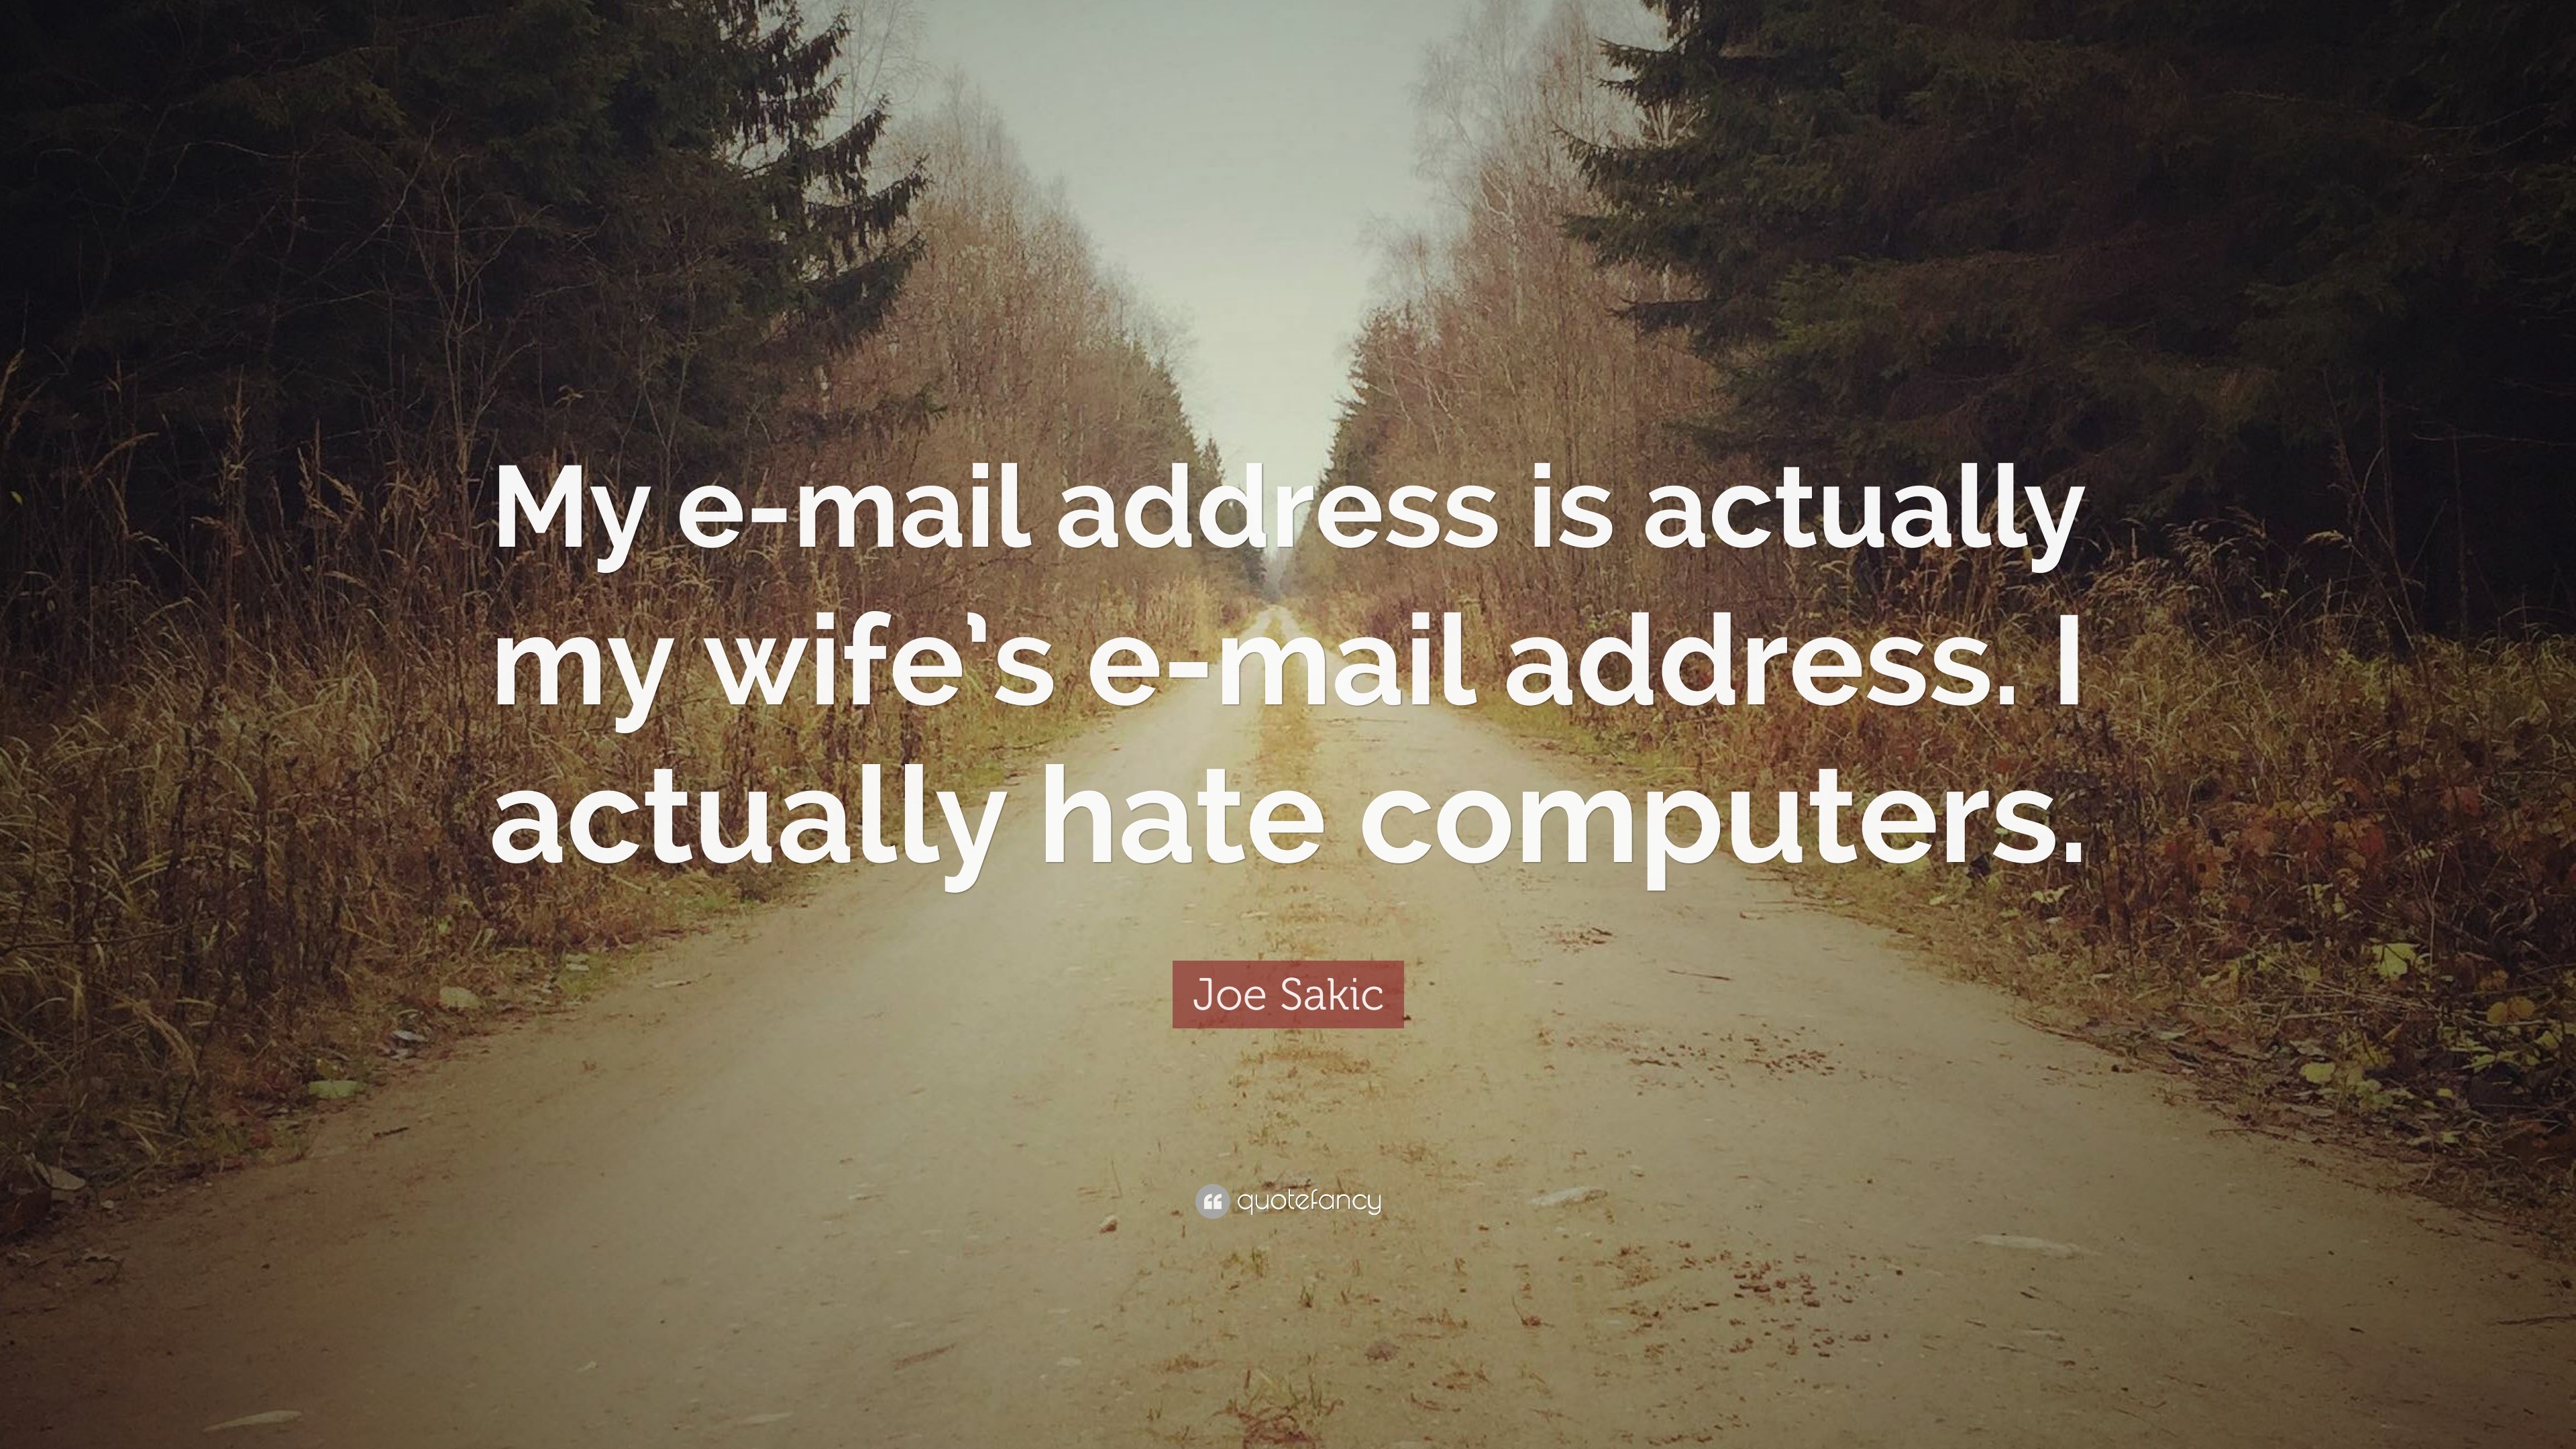 Joe Sakic Quote: “My e-mail address is actually my wife's e-mail address. I  actually